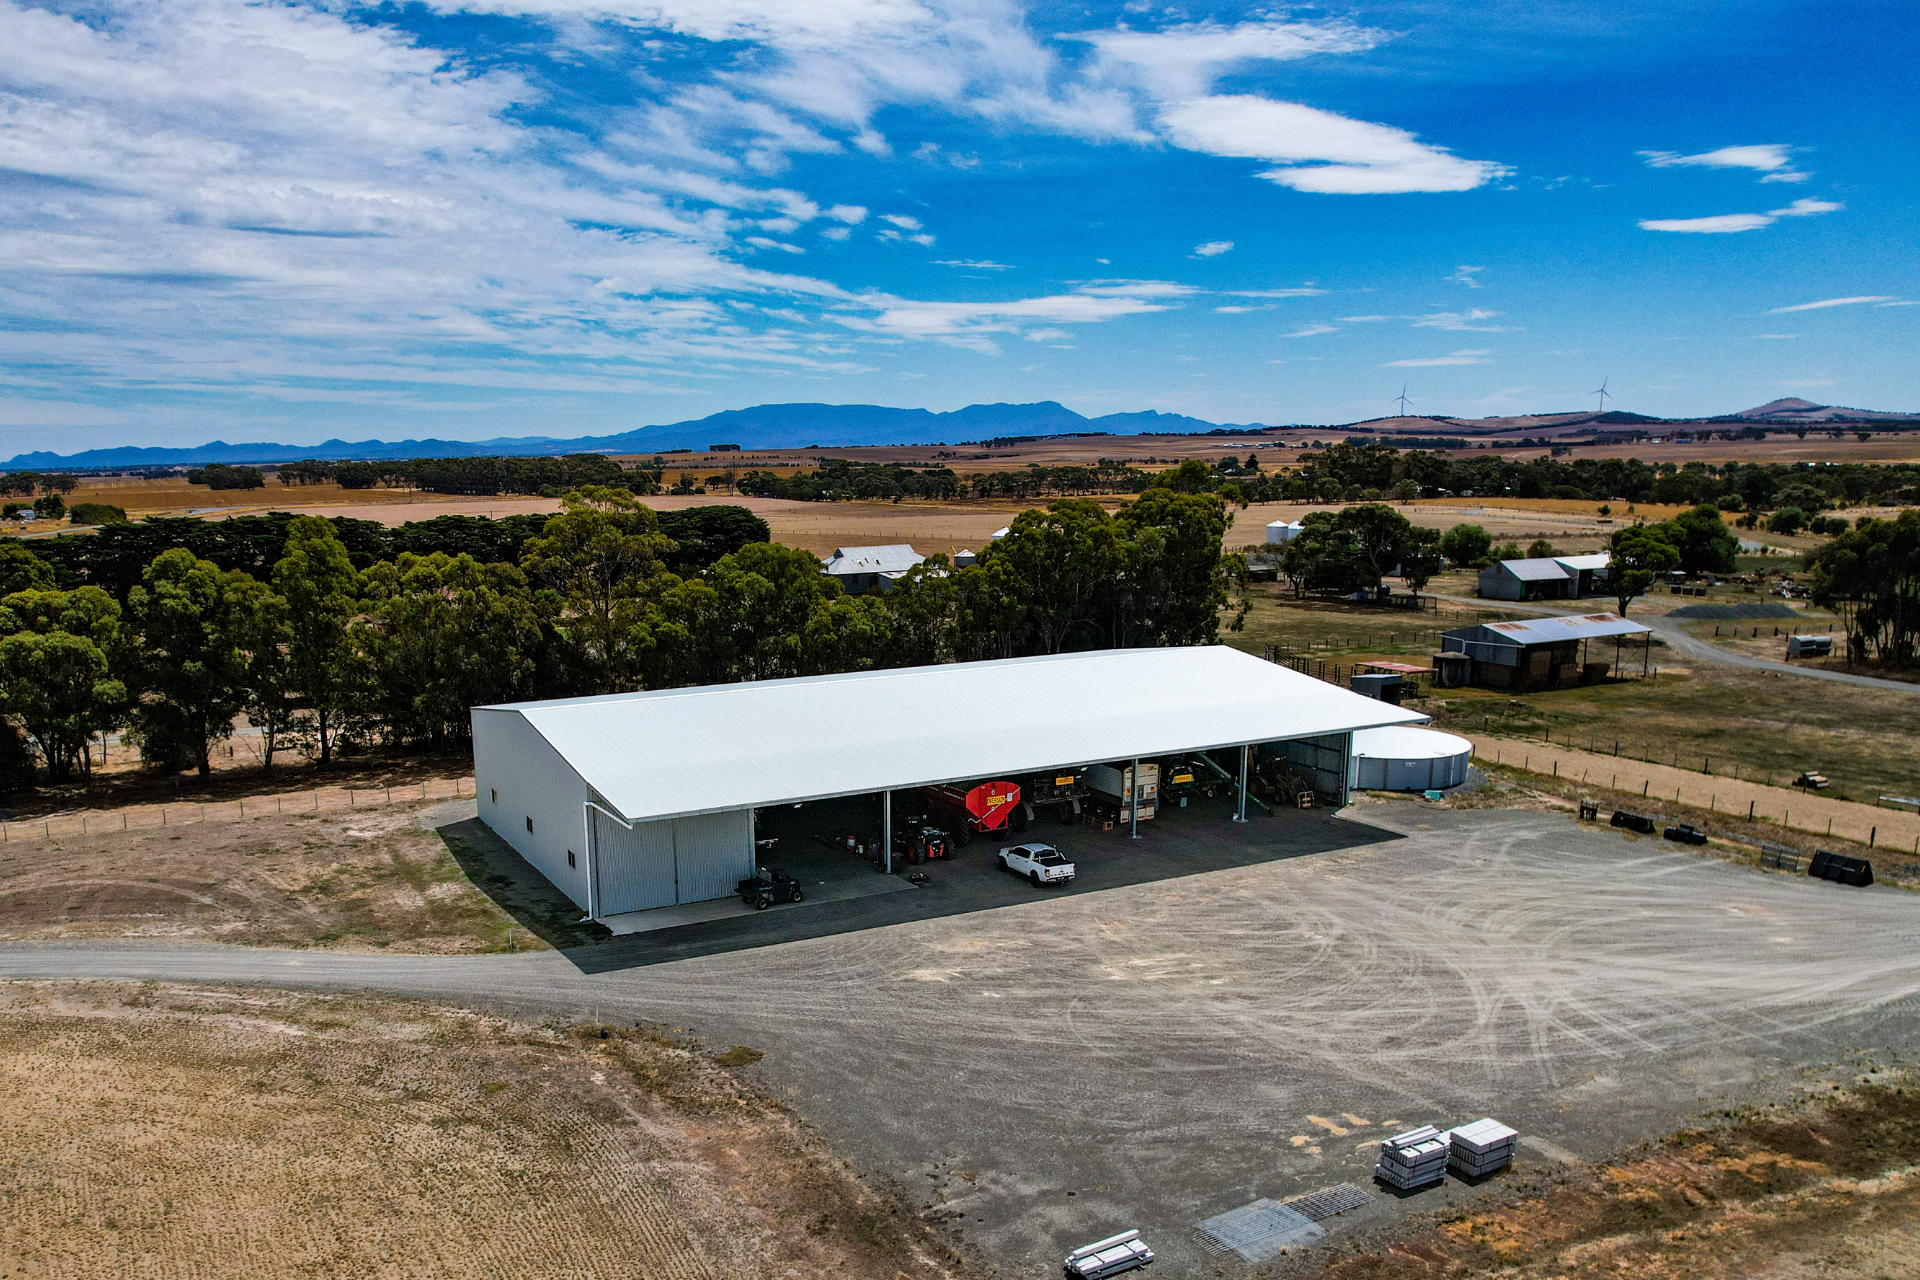 You are currently viewing 48m x 24m x 6.8m machinery shed with 6m canopy